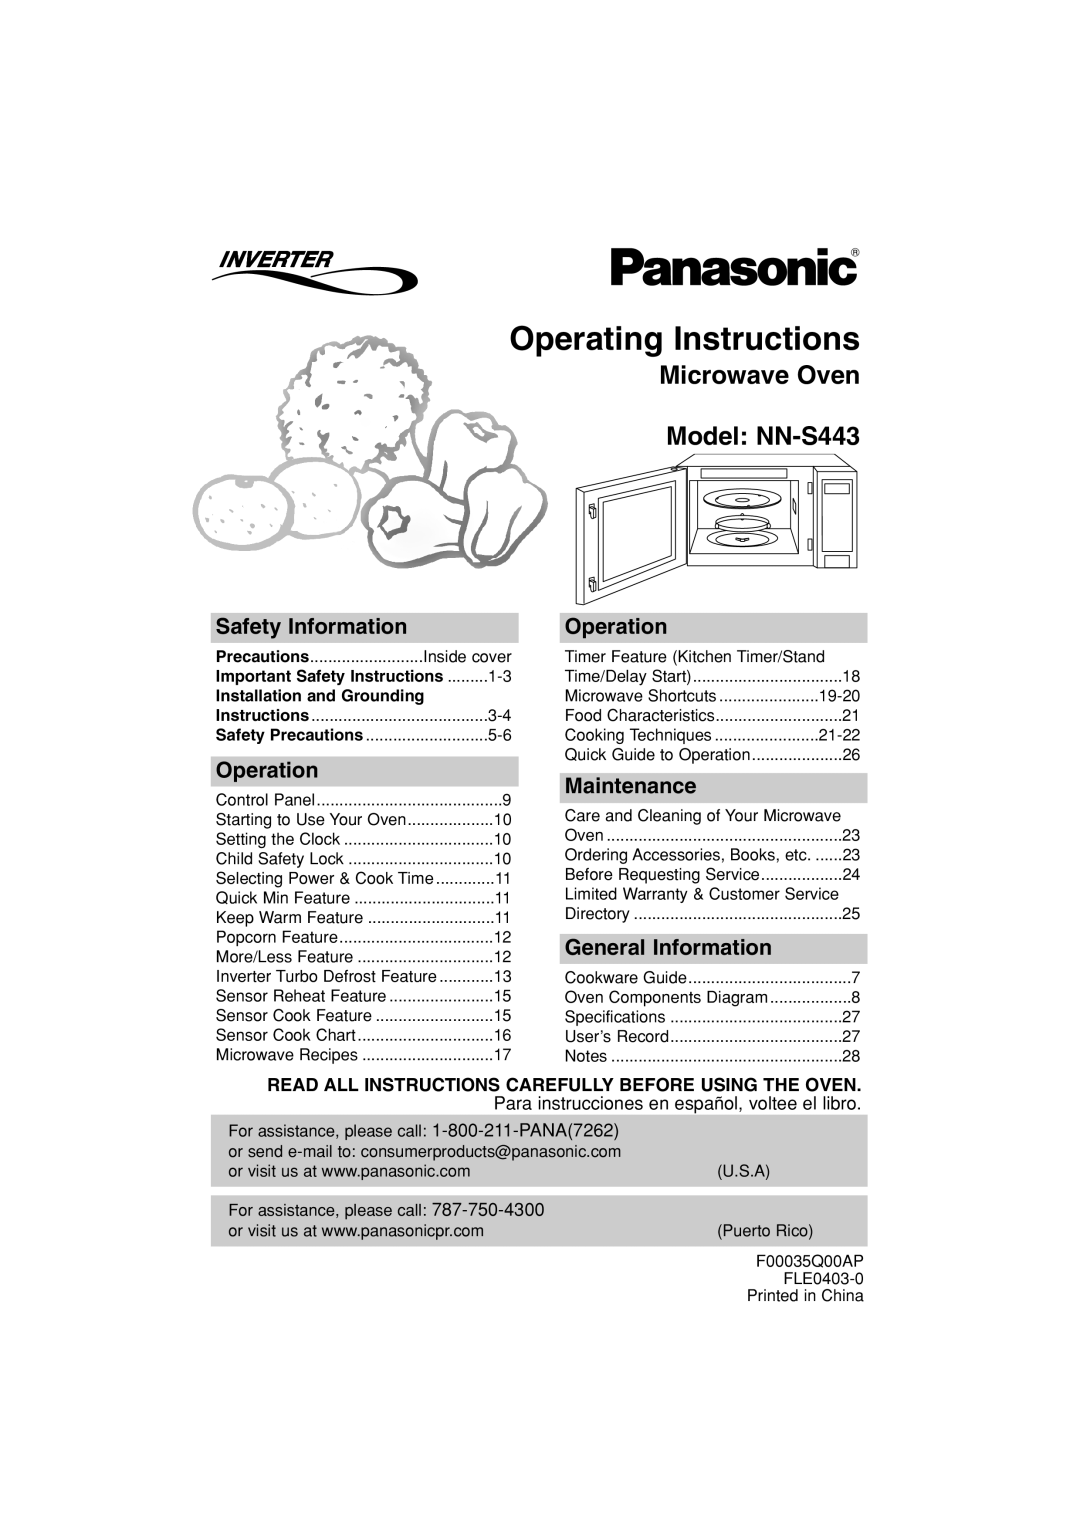 Panasonic important safety instructions Operating Instructions, Microwave Oven Model NN-S443, Safety Information 